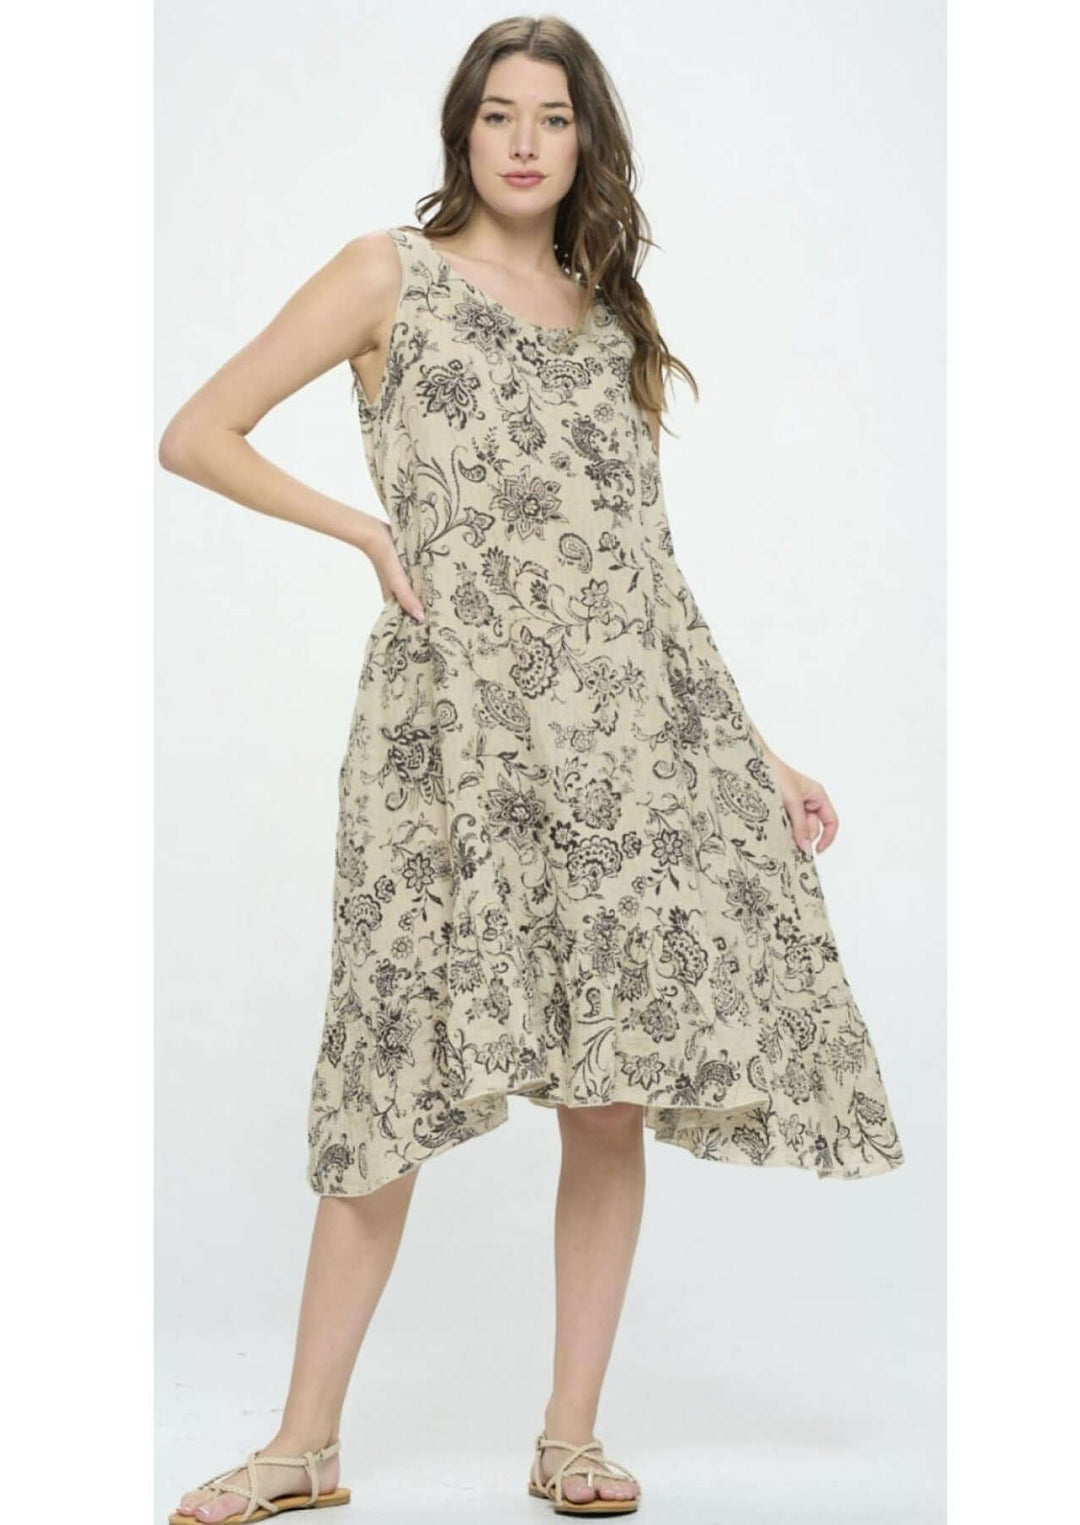 USA Made 100% Linen Ladies Sleeveless Floral Midi Dress in Taupe & Black | Match Point Style MD1041 | Women's Made in America Boutique